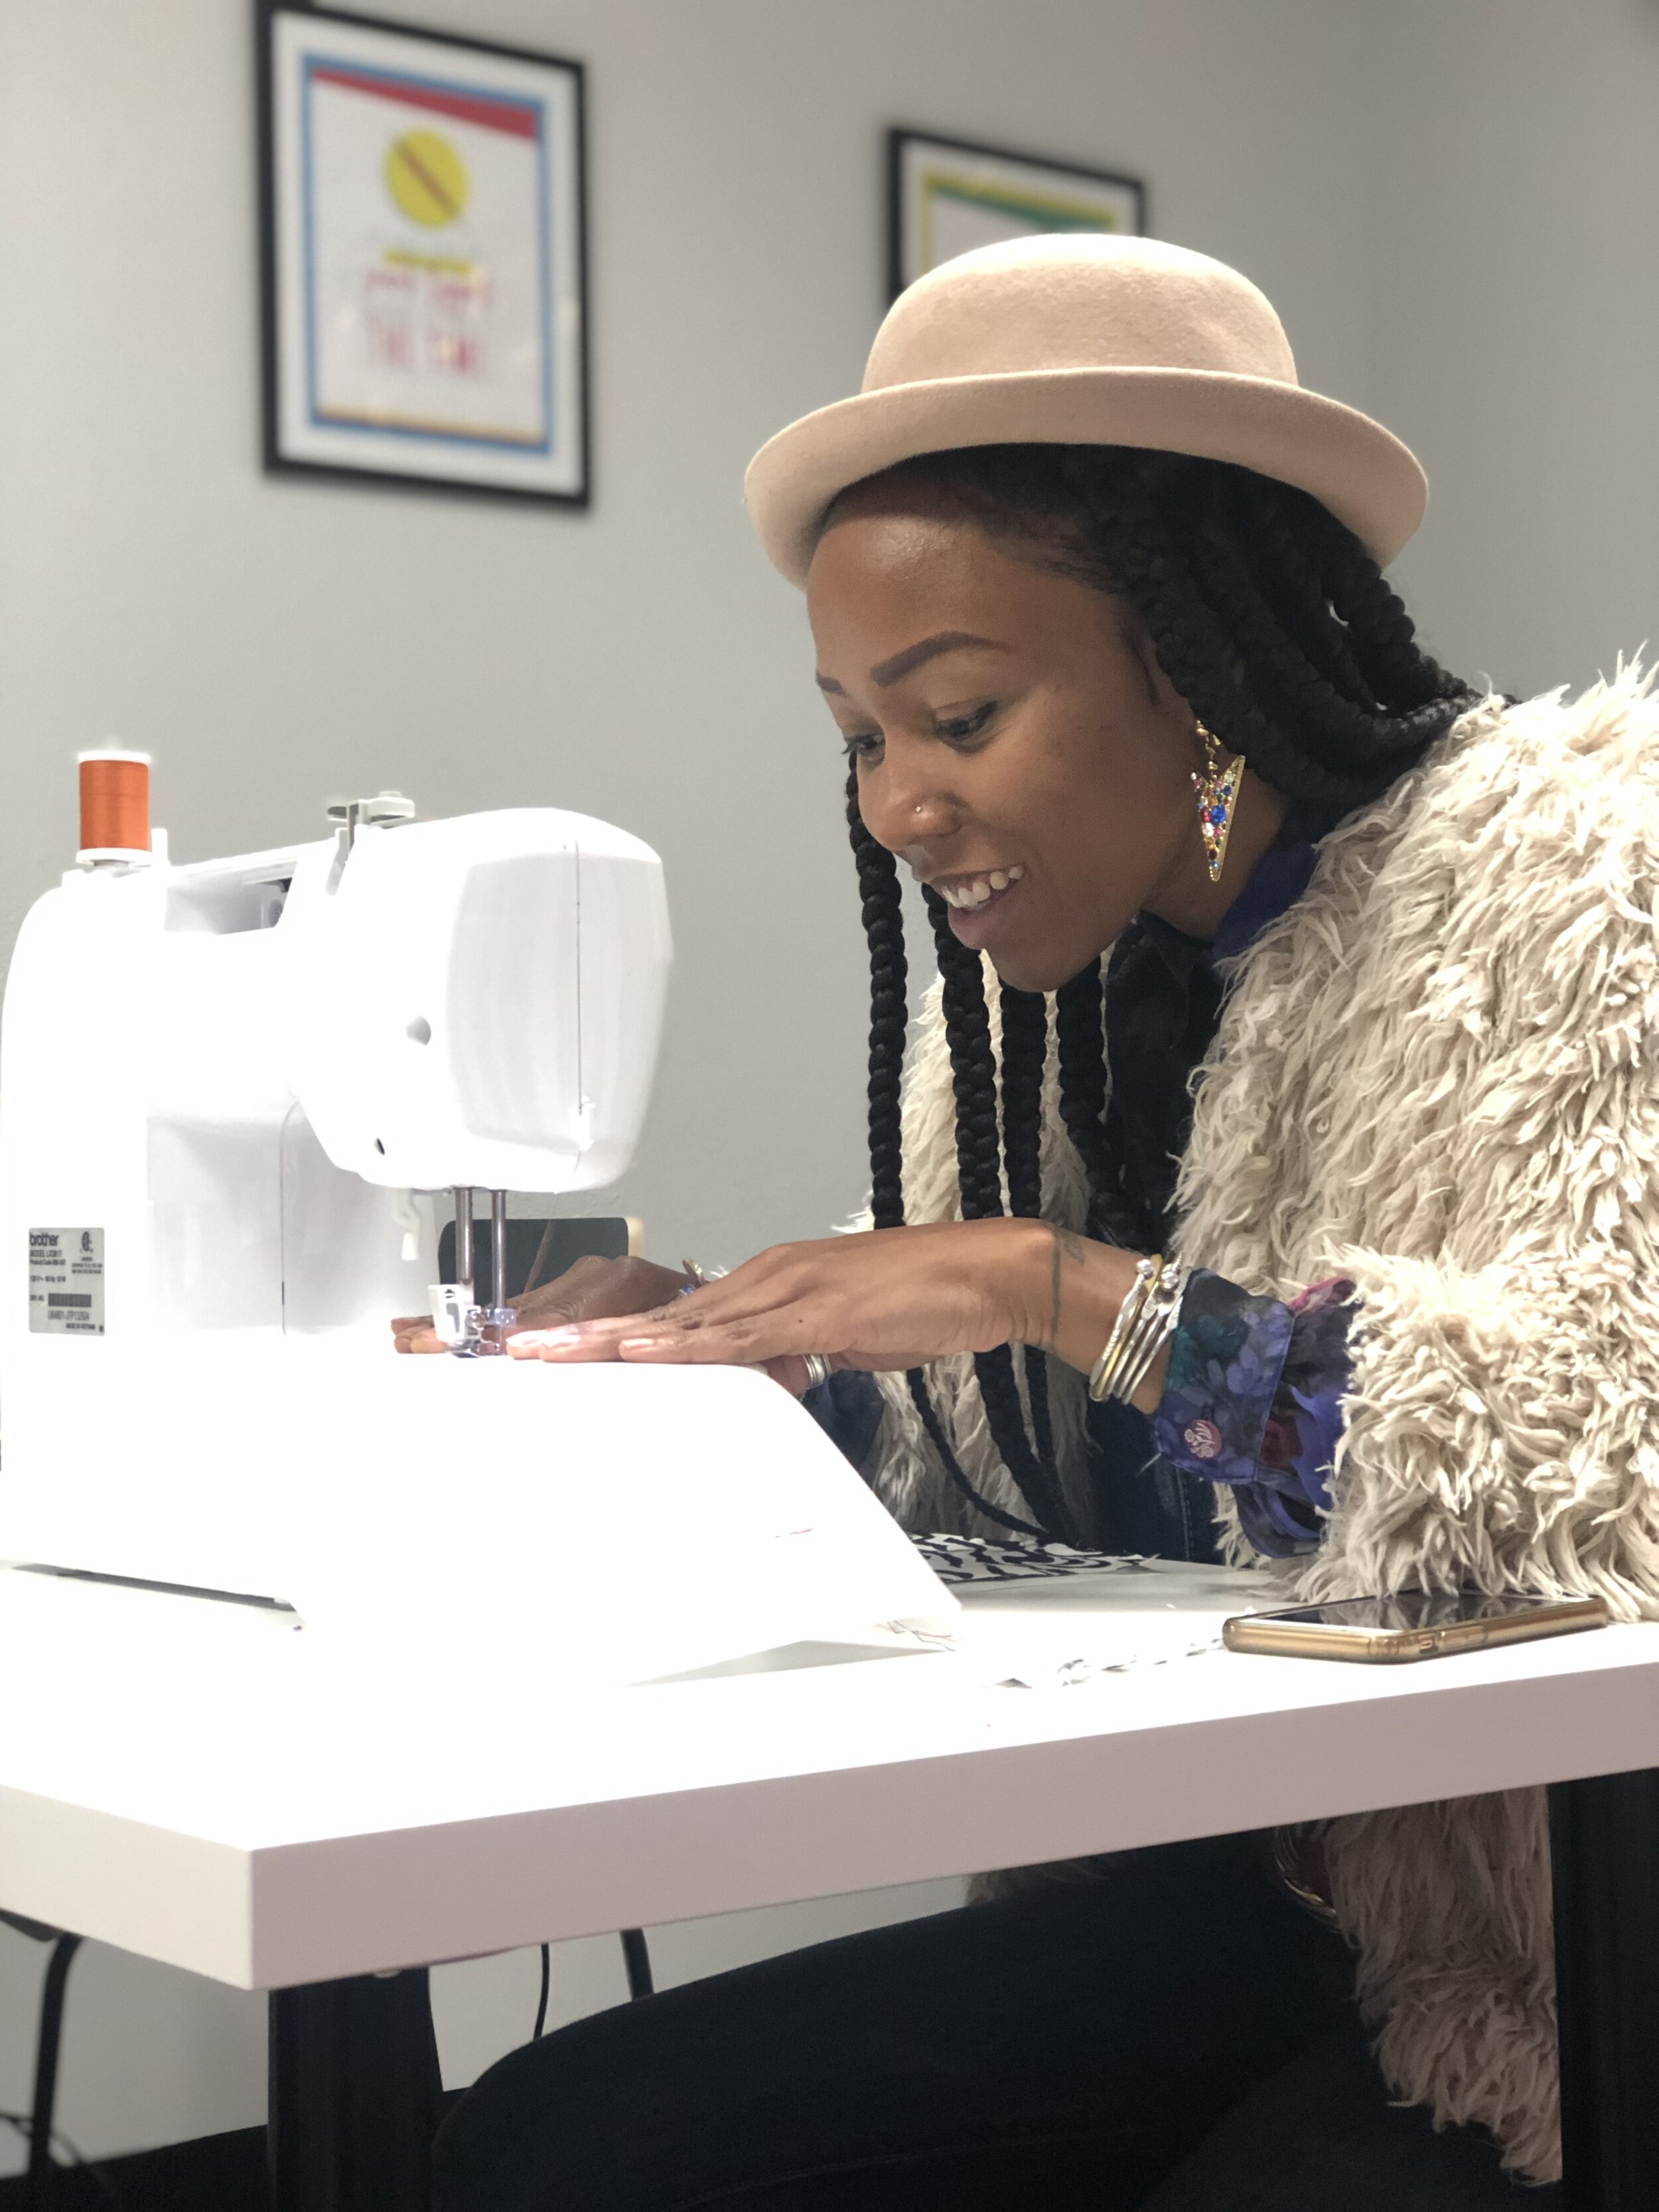 Sewing 101: Sewing Basics - Let's Learn To Sew